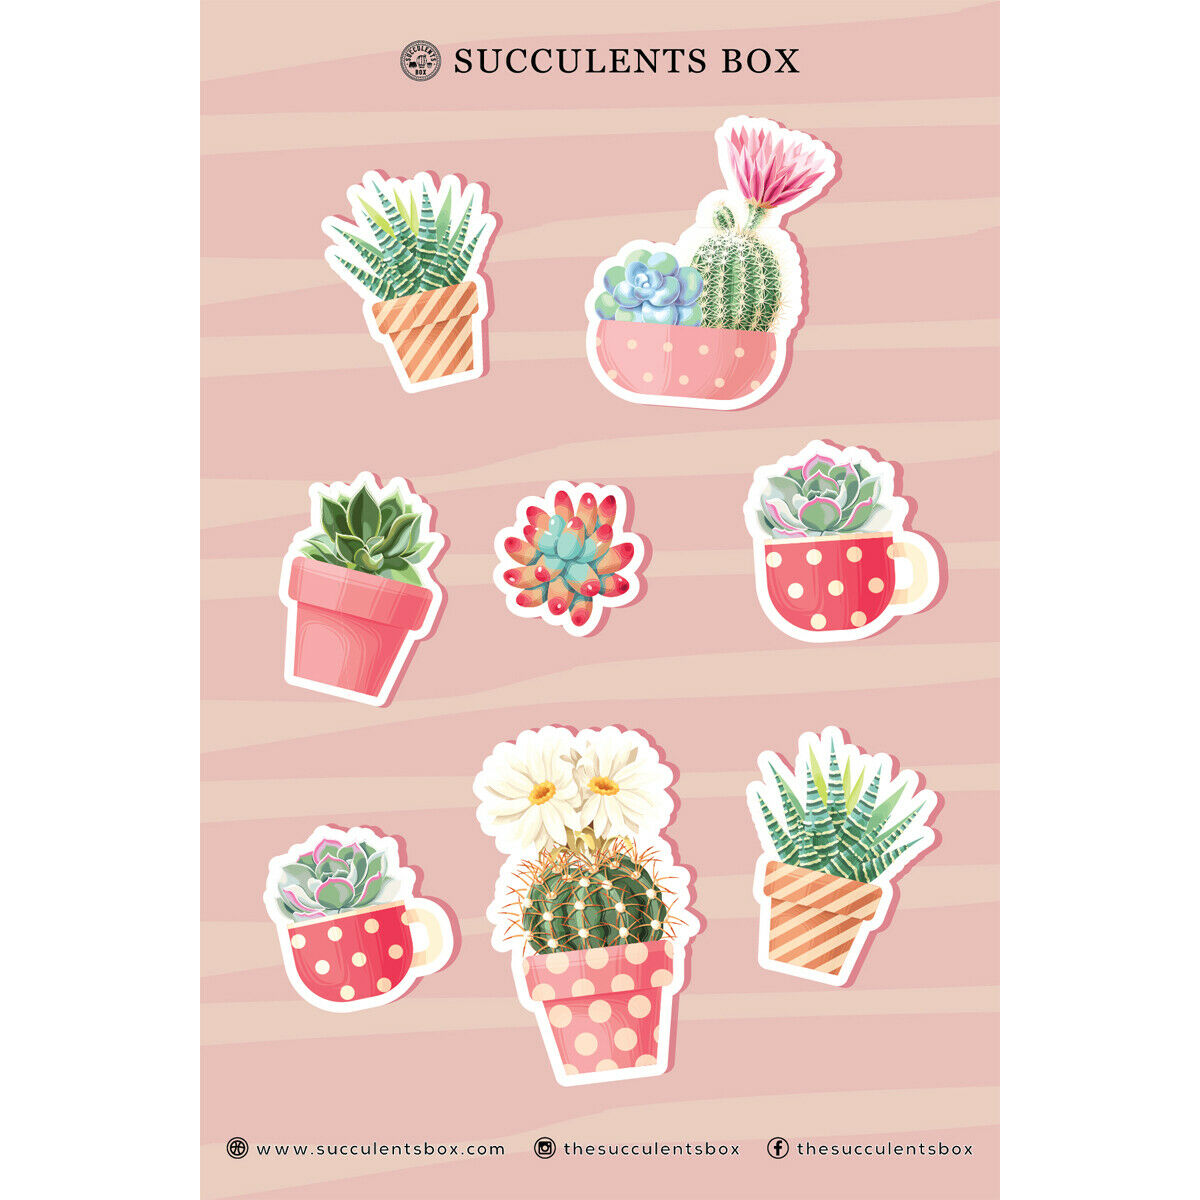 succulent stickers for sale, cactus stickers for sale, succulent craft ideas, succulent gift ideas, cute plant stickers